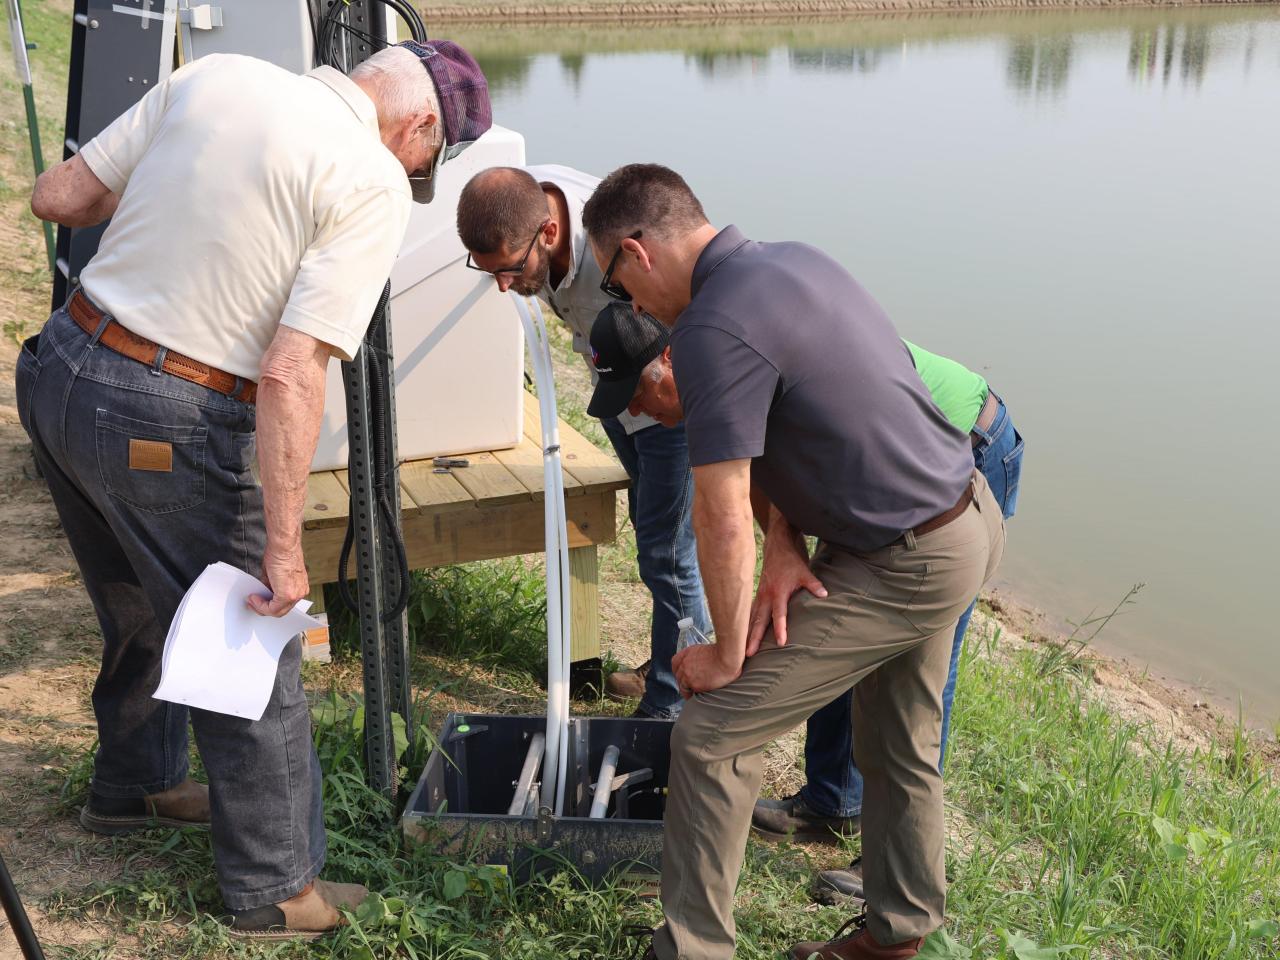 Drainage day participants examine components by the pond